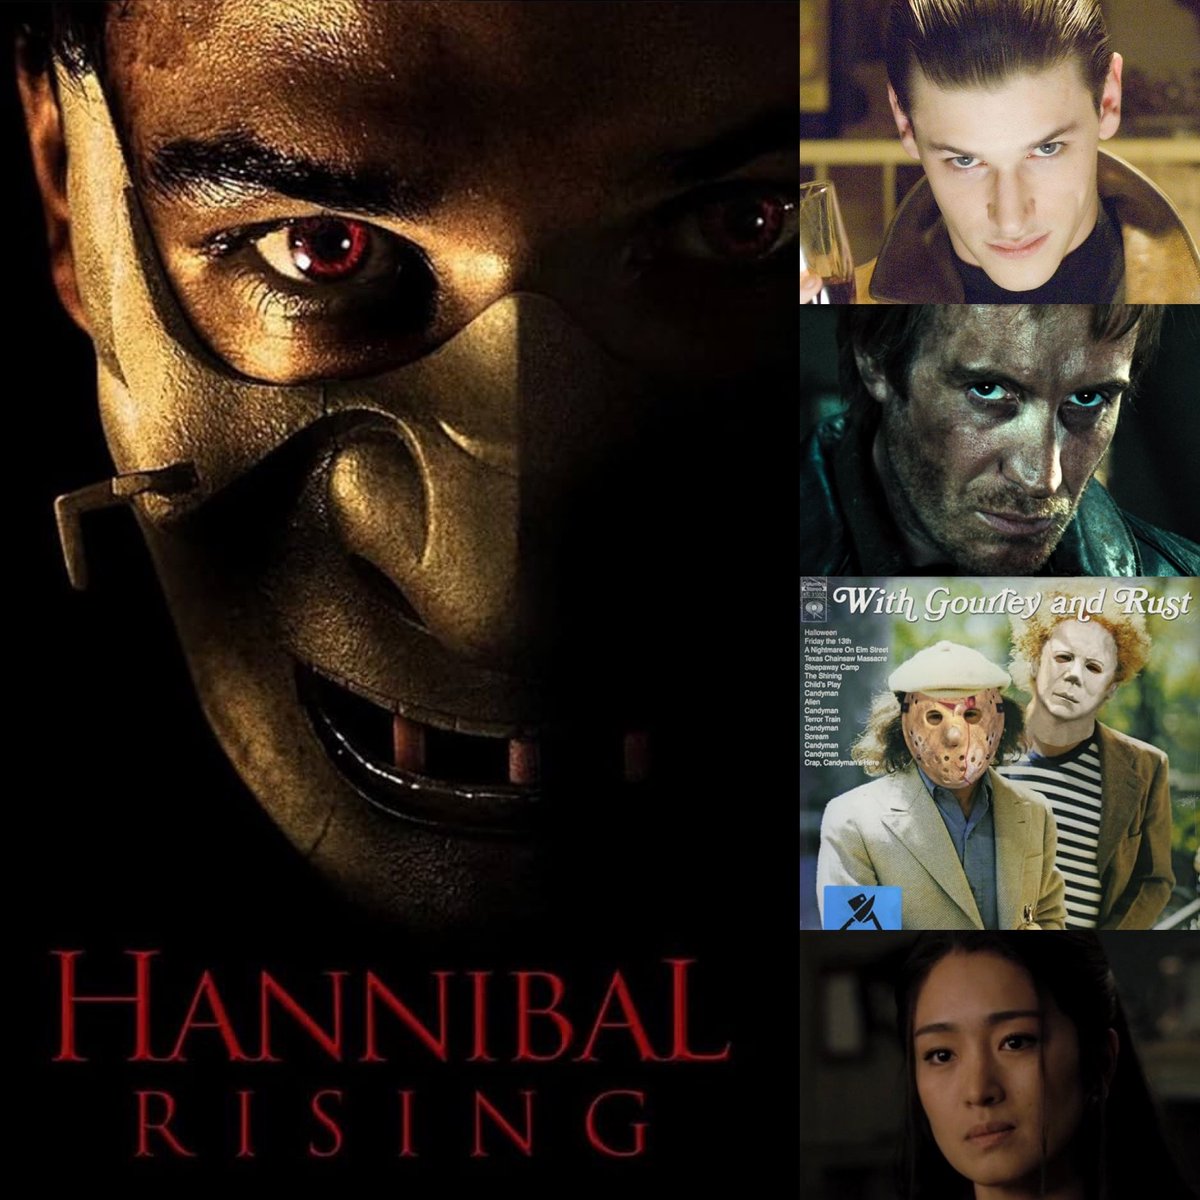 Join @MattGourley and me today on “With @gourleyandrust” for a PODCAST RECORDING of a HANNIBAL RISING. Avail everywhere! rb.gy/lybpql